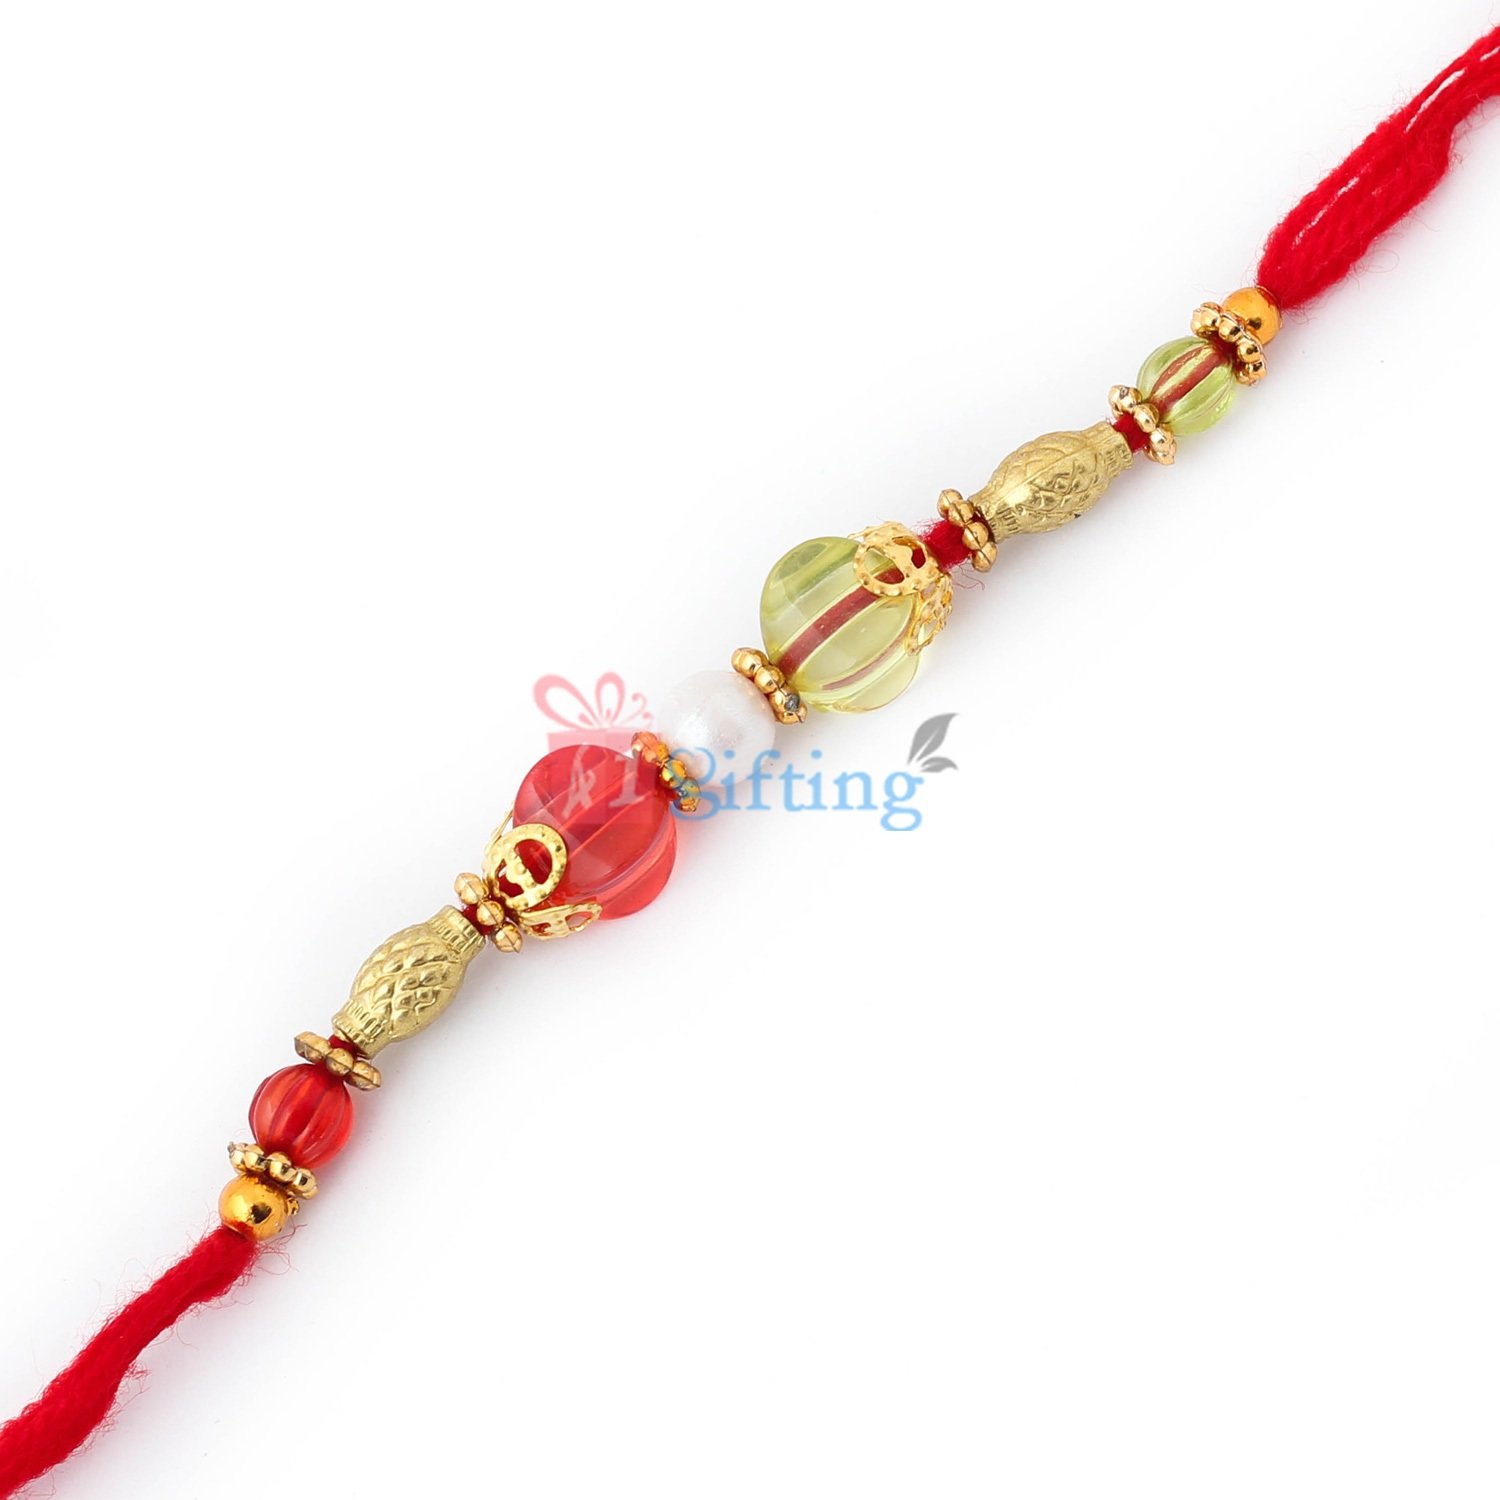 Heritage combination of red and green crystals with golden beads